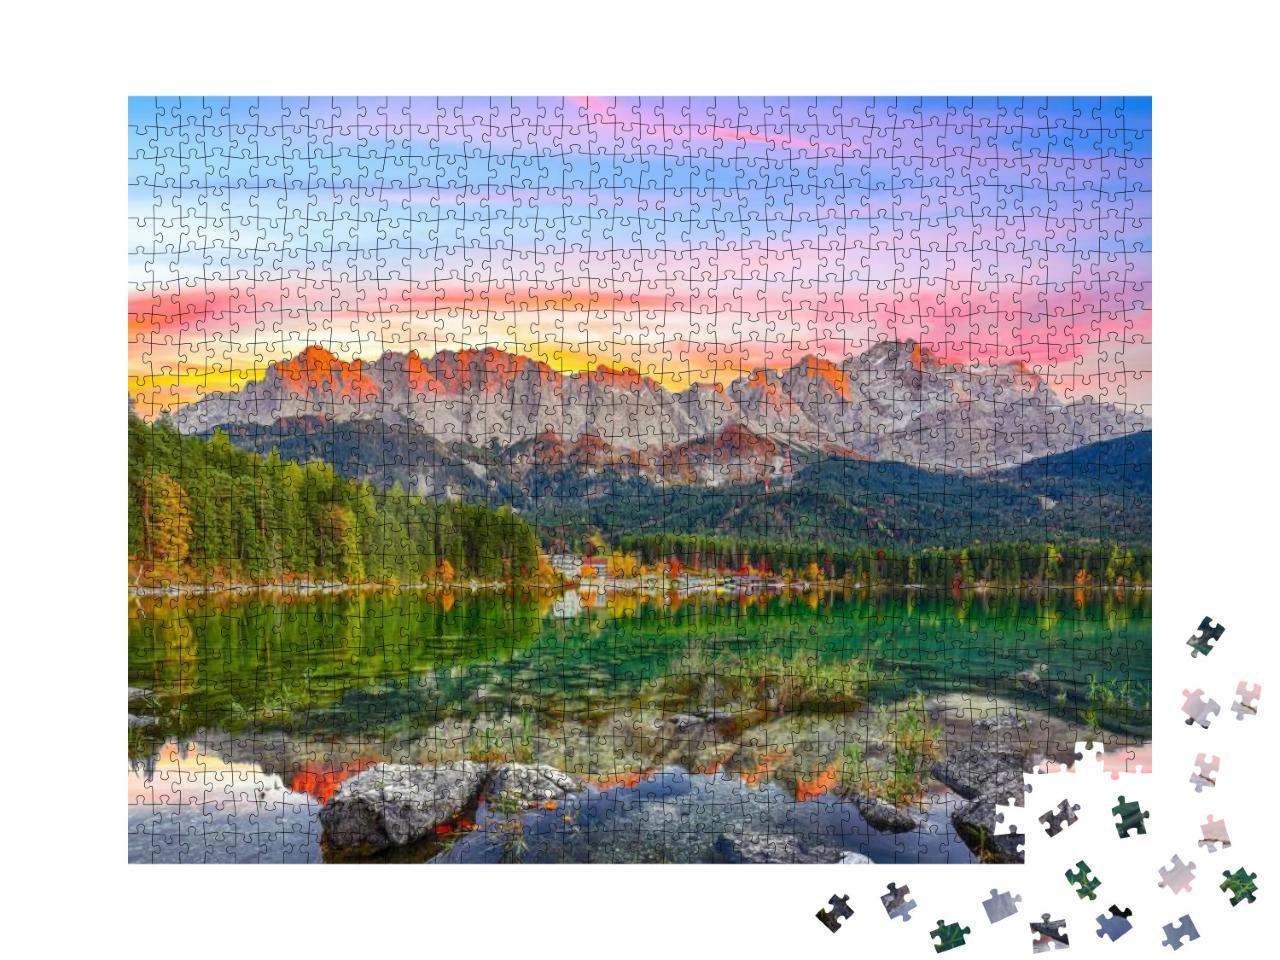 Fabulous Autumn Landscape of Eibsee Lake in Front of Zugs... Jigsaw Puzzle with 1000 pieces